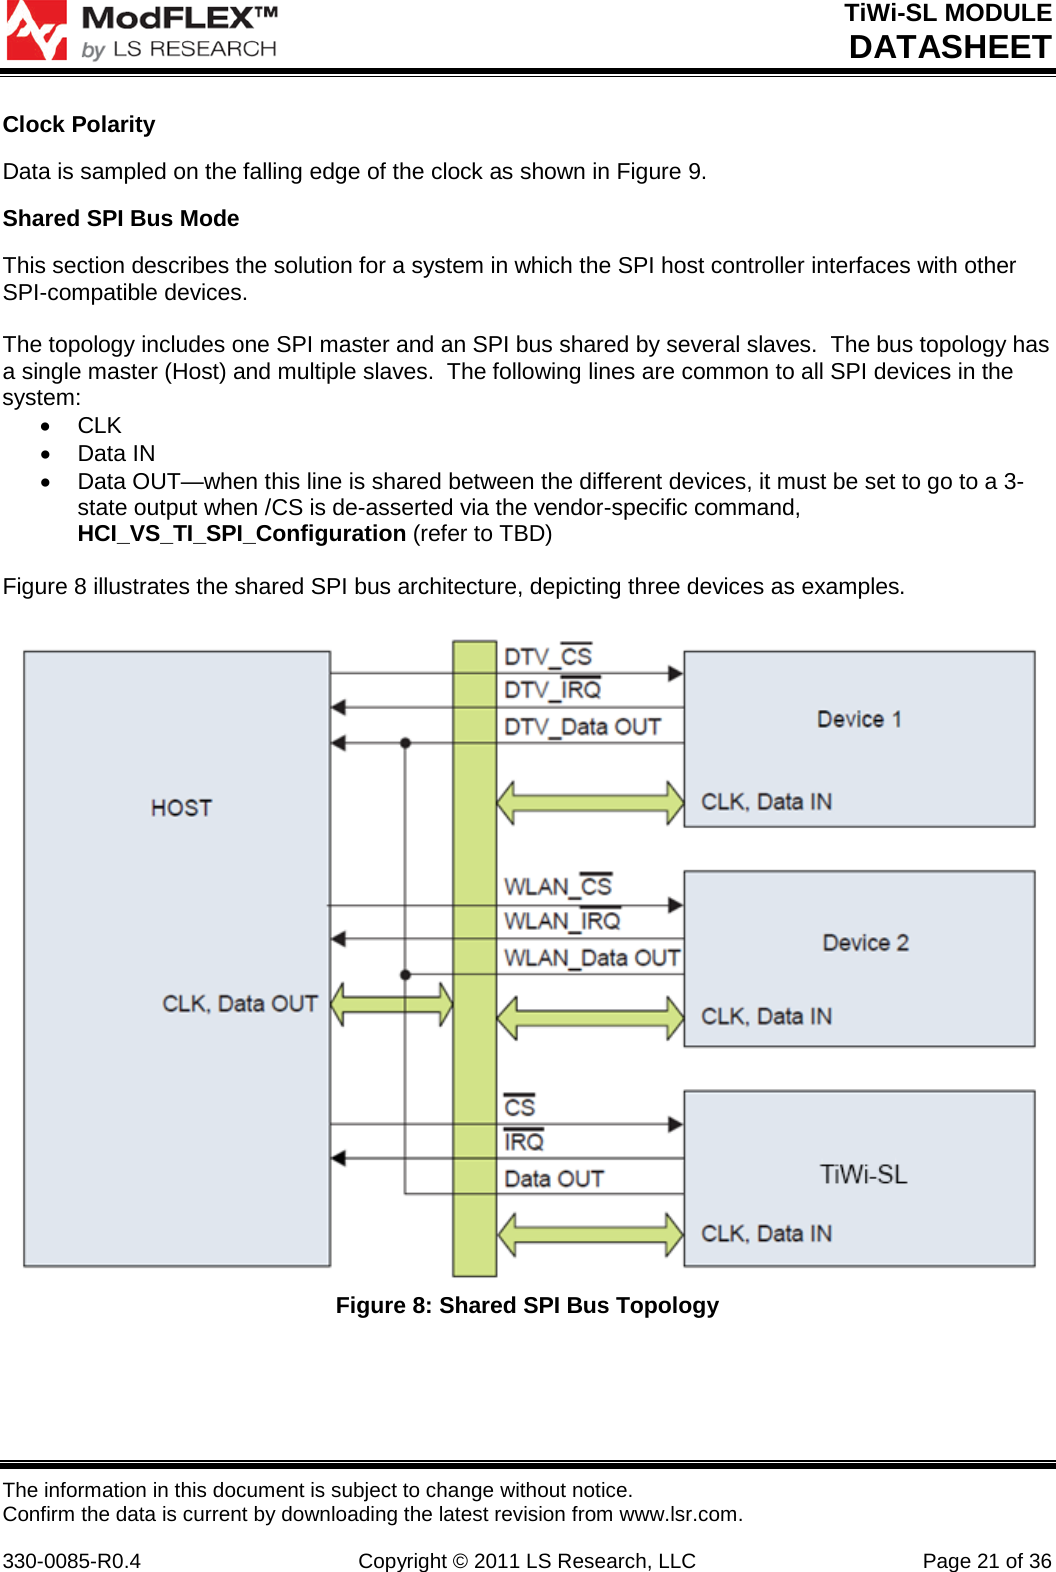 TiWi-SL MODULE DATASHEET The information in this document is subject to change without notice. Confirm the data is current by downloading the latest revision from www.lsr.com.  330-0085-R0.4 Copyright © 2011 LS Research, LLC Page 21 of 36 Clock Polarity Data is sampled on the falling edge of the clock as shown in Figure 9. Shared SPI Bus Mode This section describes the solution for a system in which the SPI host controller interfaces with other SPI-compatible devices.  The topology includes one SPI master and an SPI bus shared by several slaves.  The bus topology has a single master (Host) and multiple slaves.  The following lines are common to all SPI devices in the system: • CLK • Data IN • Data OUT—when this line is shared between the different devices, it must be set to go to a 3-state output when /CS is de-asserted via the vendor-specific command, HCI_VS_TI_SPI_Configuration (refer to TBD)  Figure 8 illustrates the shared SPI bus architecture, depicting three devices as examples.   Figure 8: Shared SPI Bus Topology    